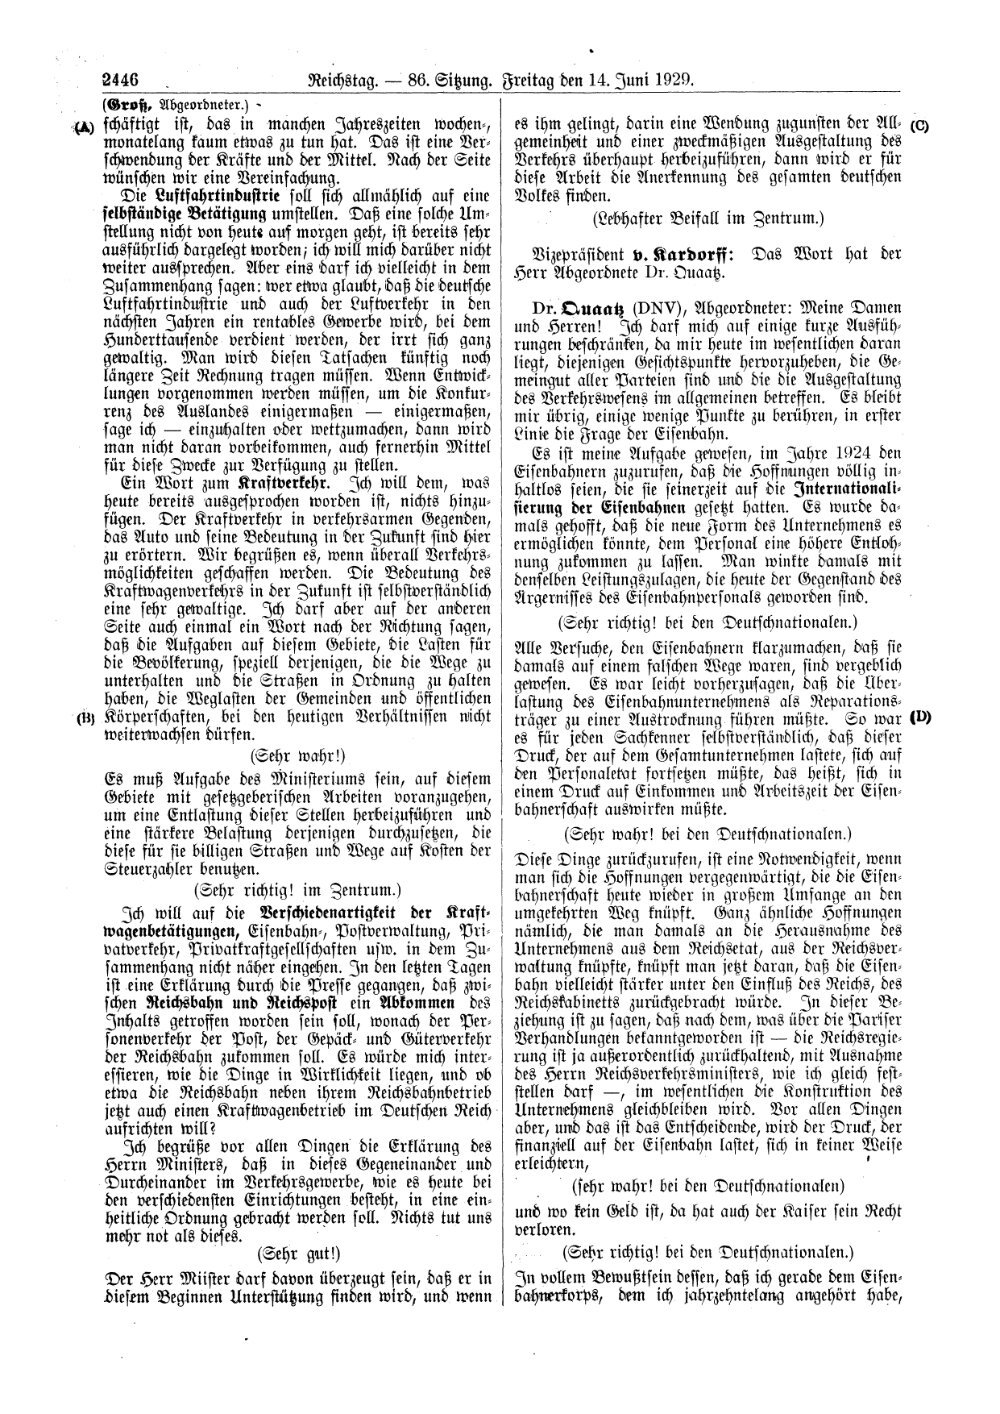 Scan of page 2446